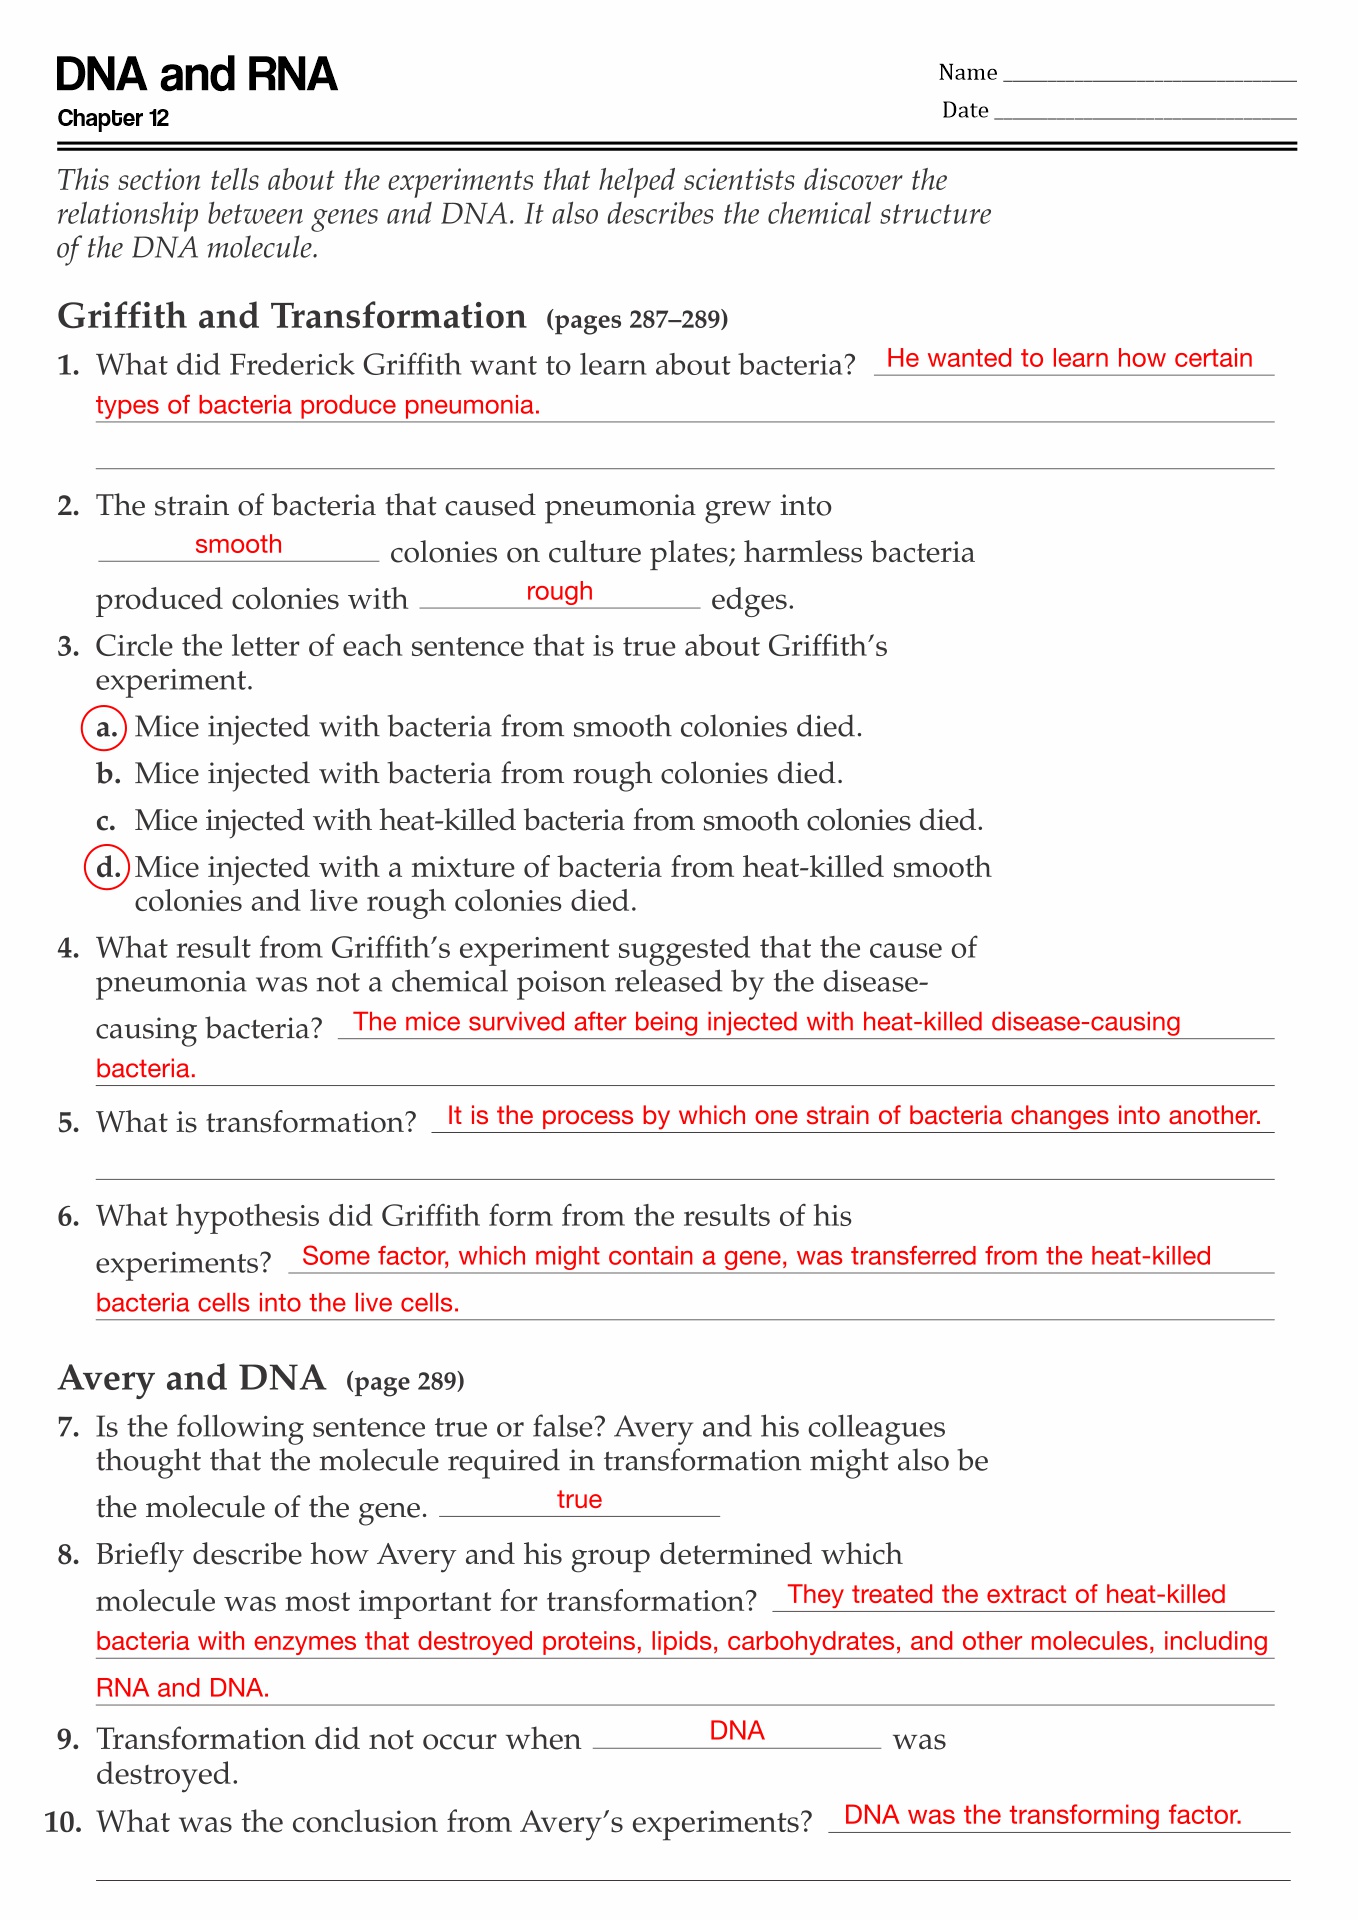 Chapter 12 DNA and RNA Answer Key